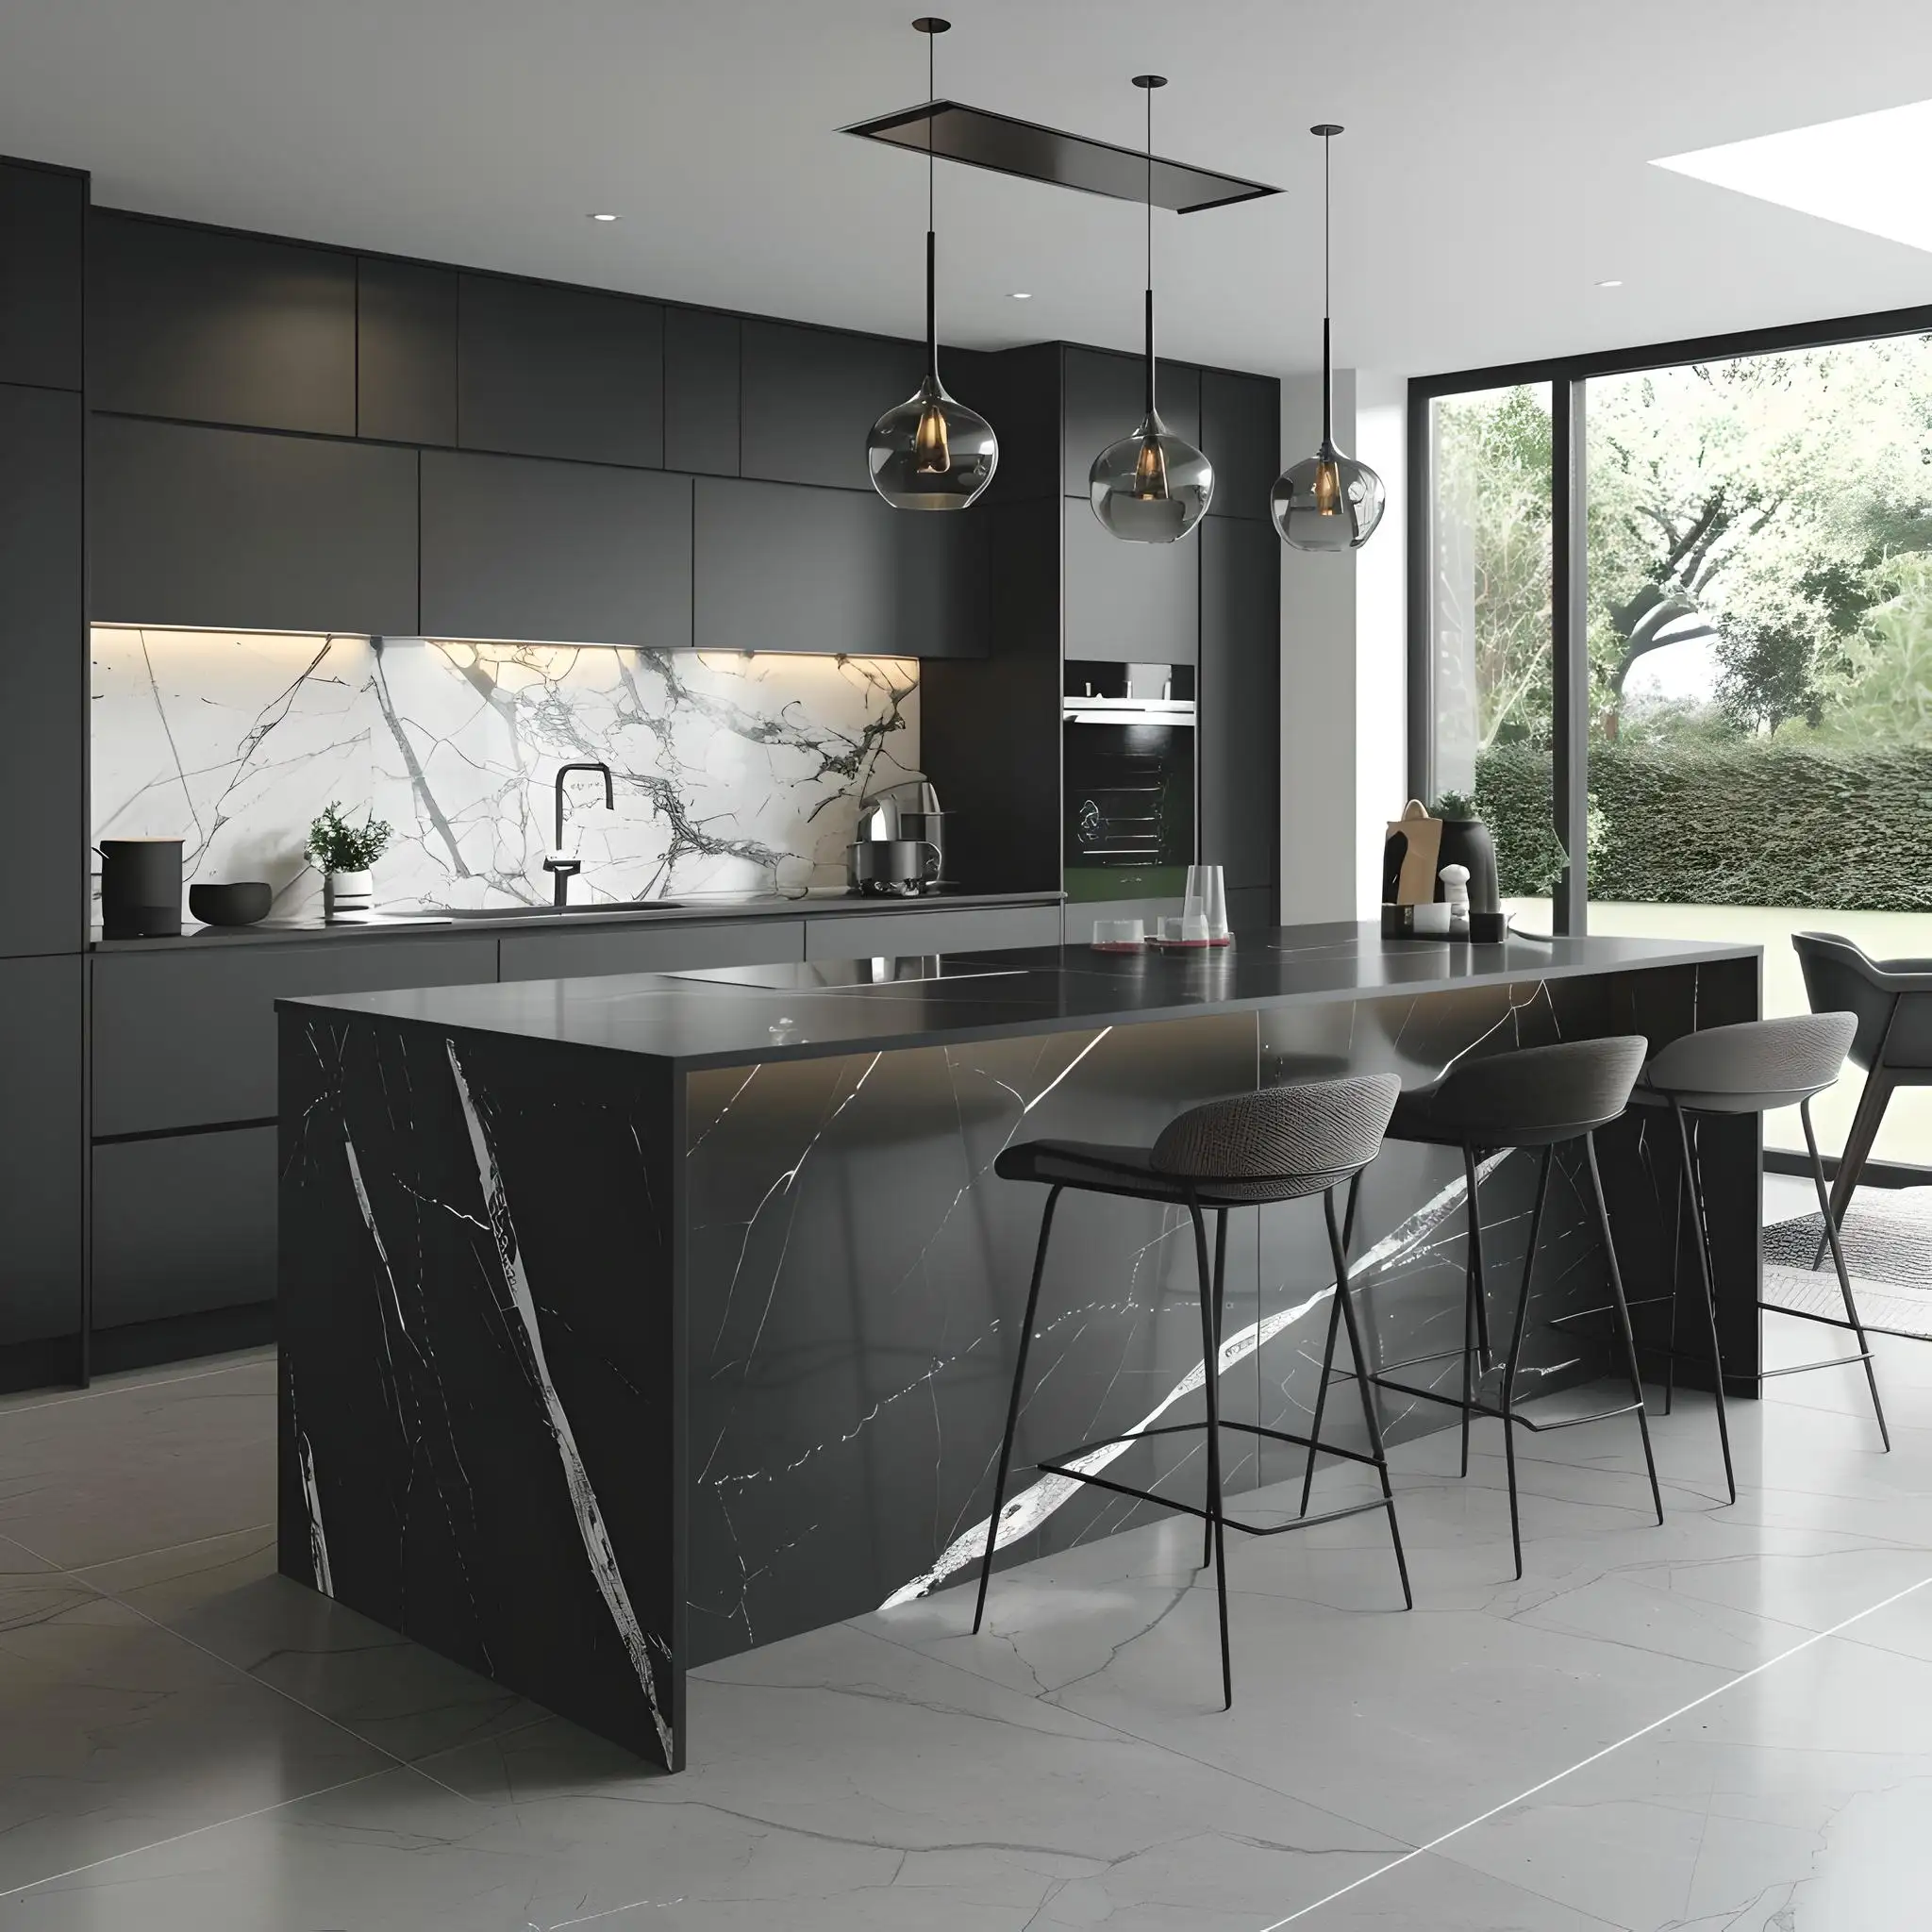 Dramatic black kitchen with marble tops and black stools